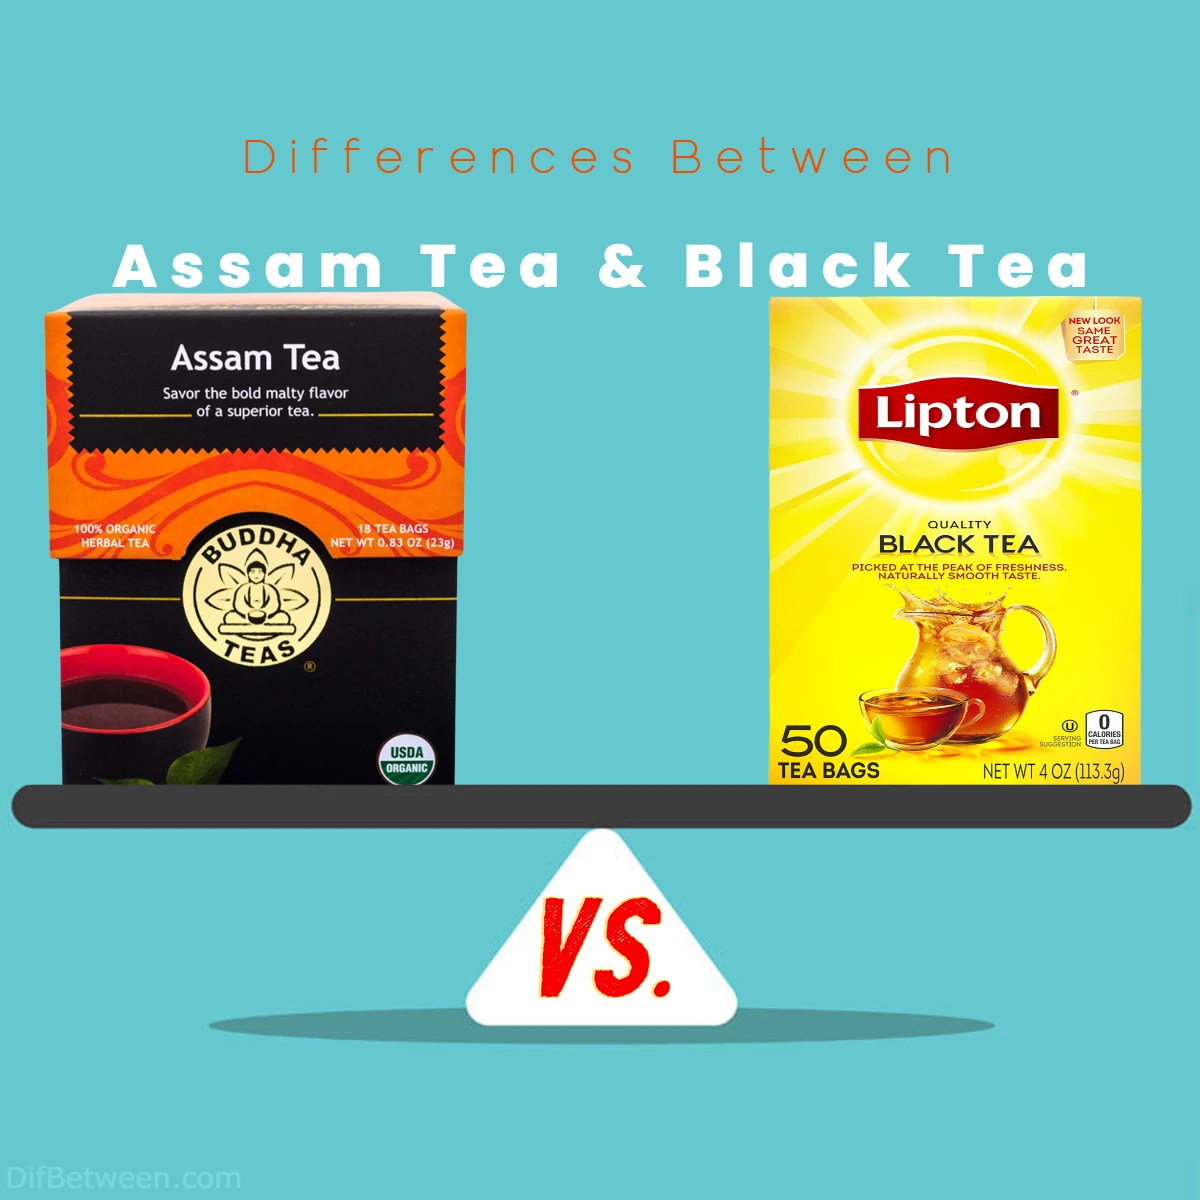 Difference Between Black Tea and Assam Tea